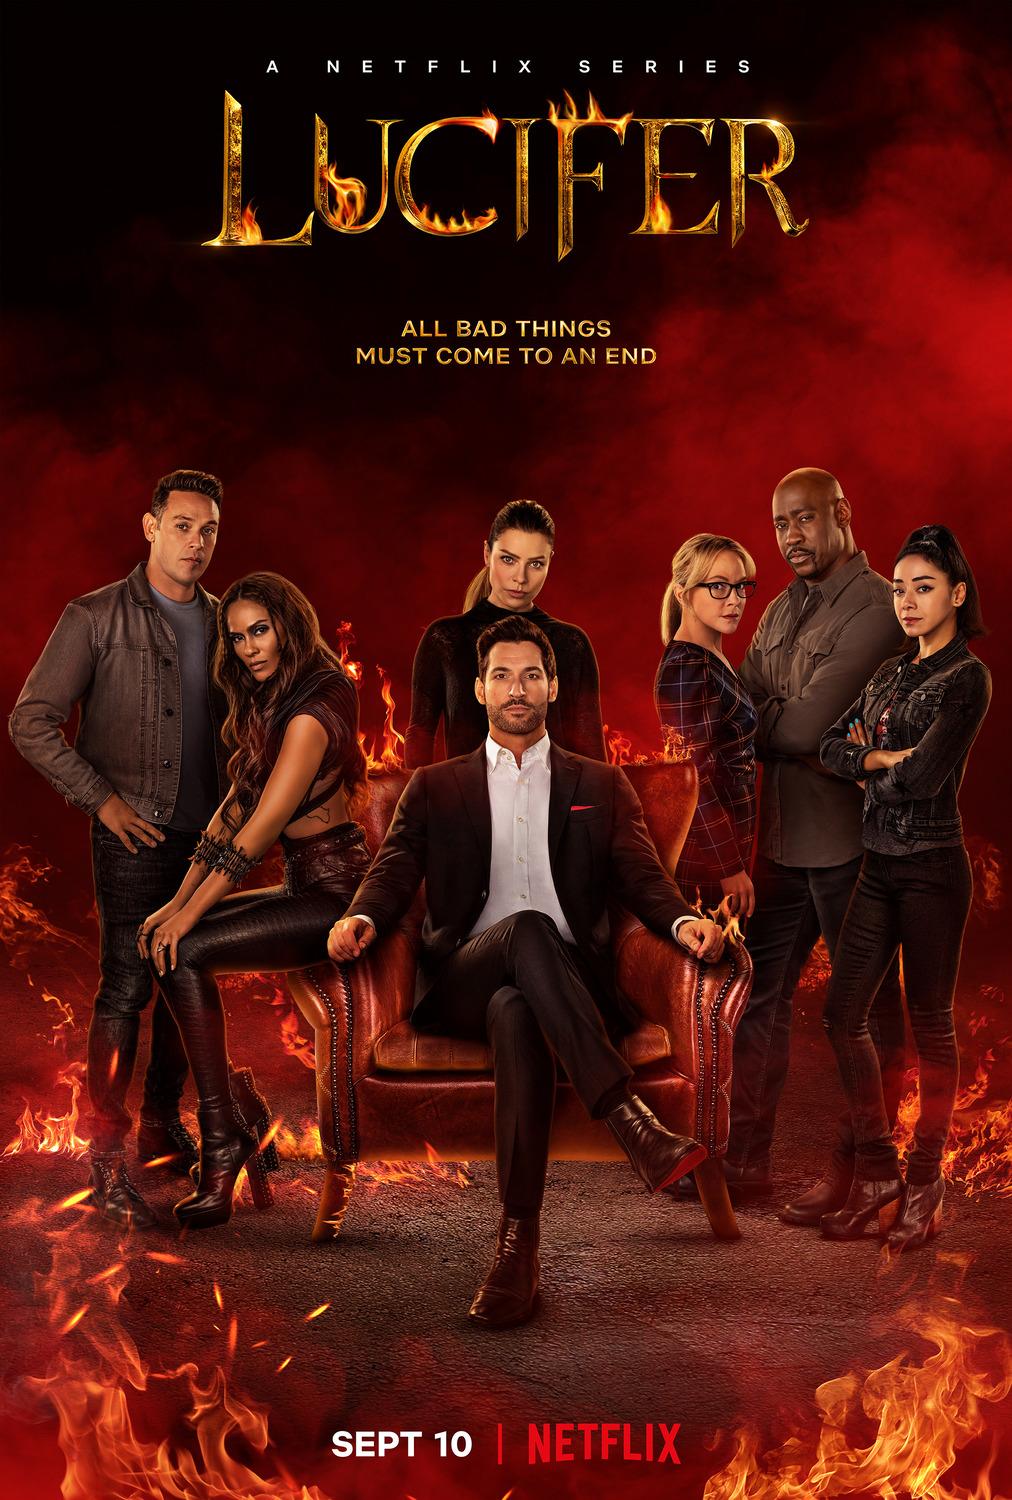 This Netflix favorite portrays Lucifer Morningstar's unexpected decision to leave Hell and explore life on Earth, seeking to understand humanity and relationships